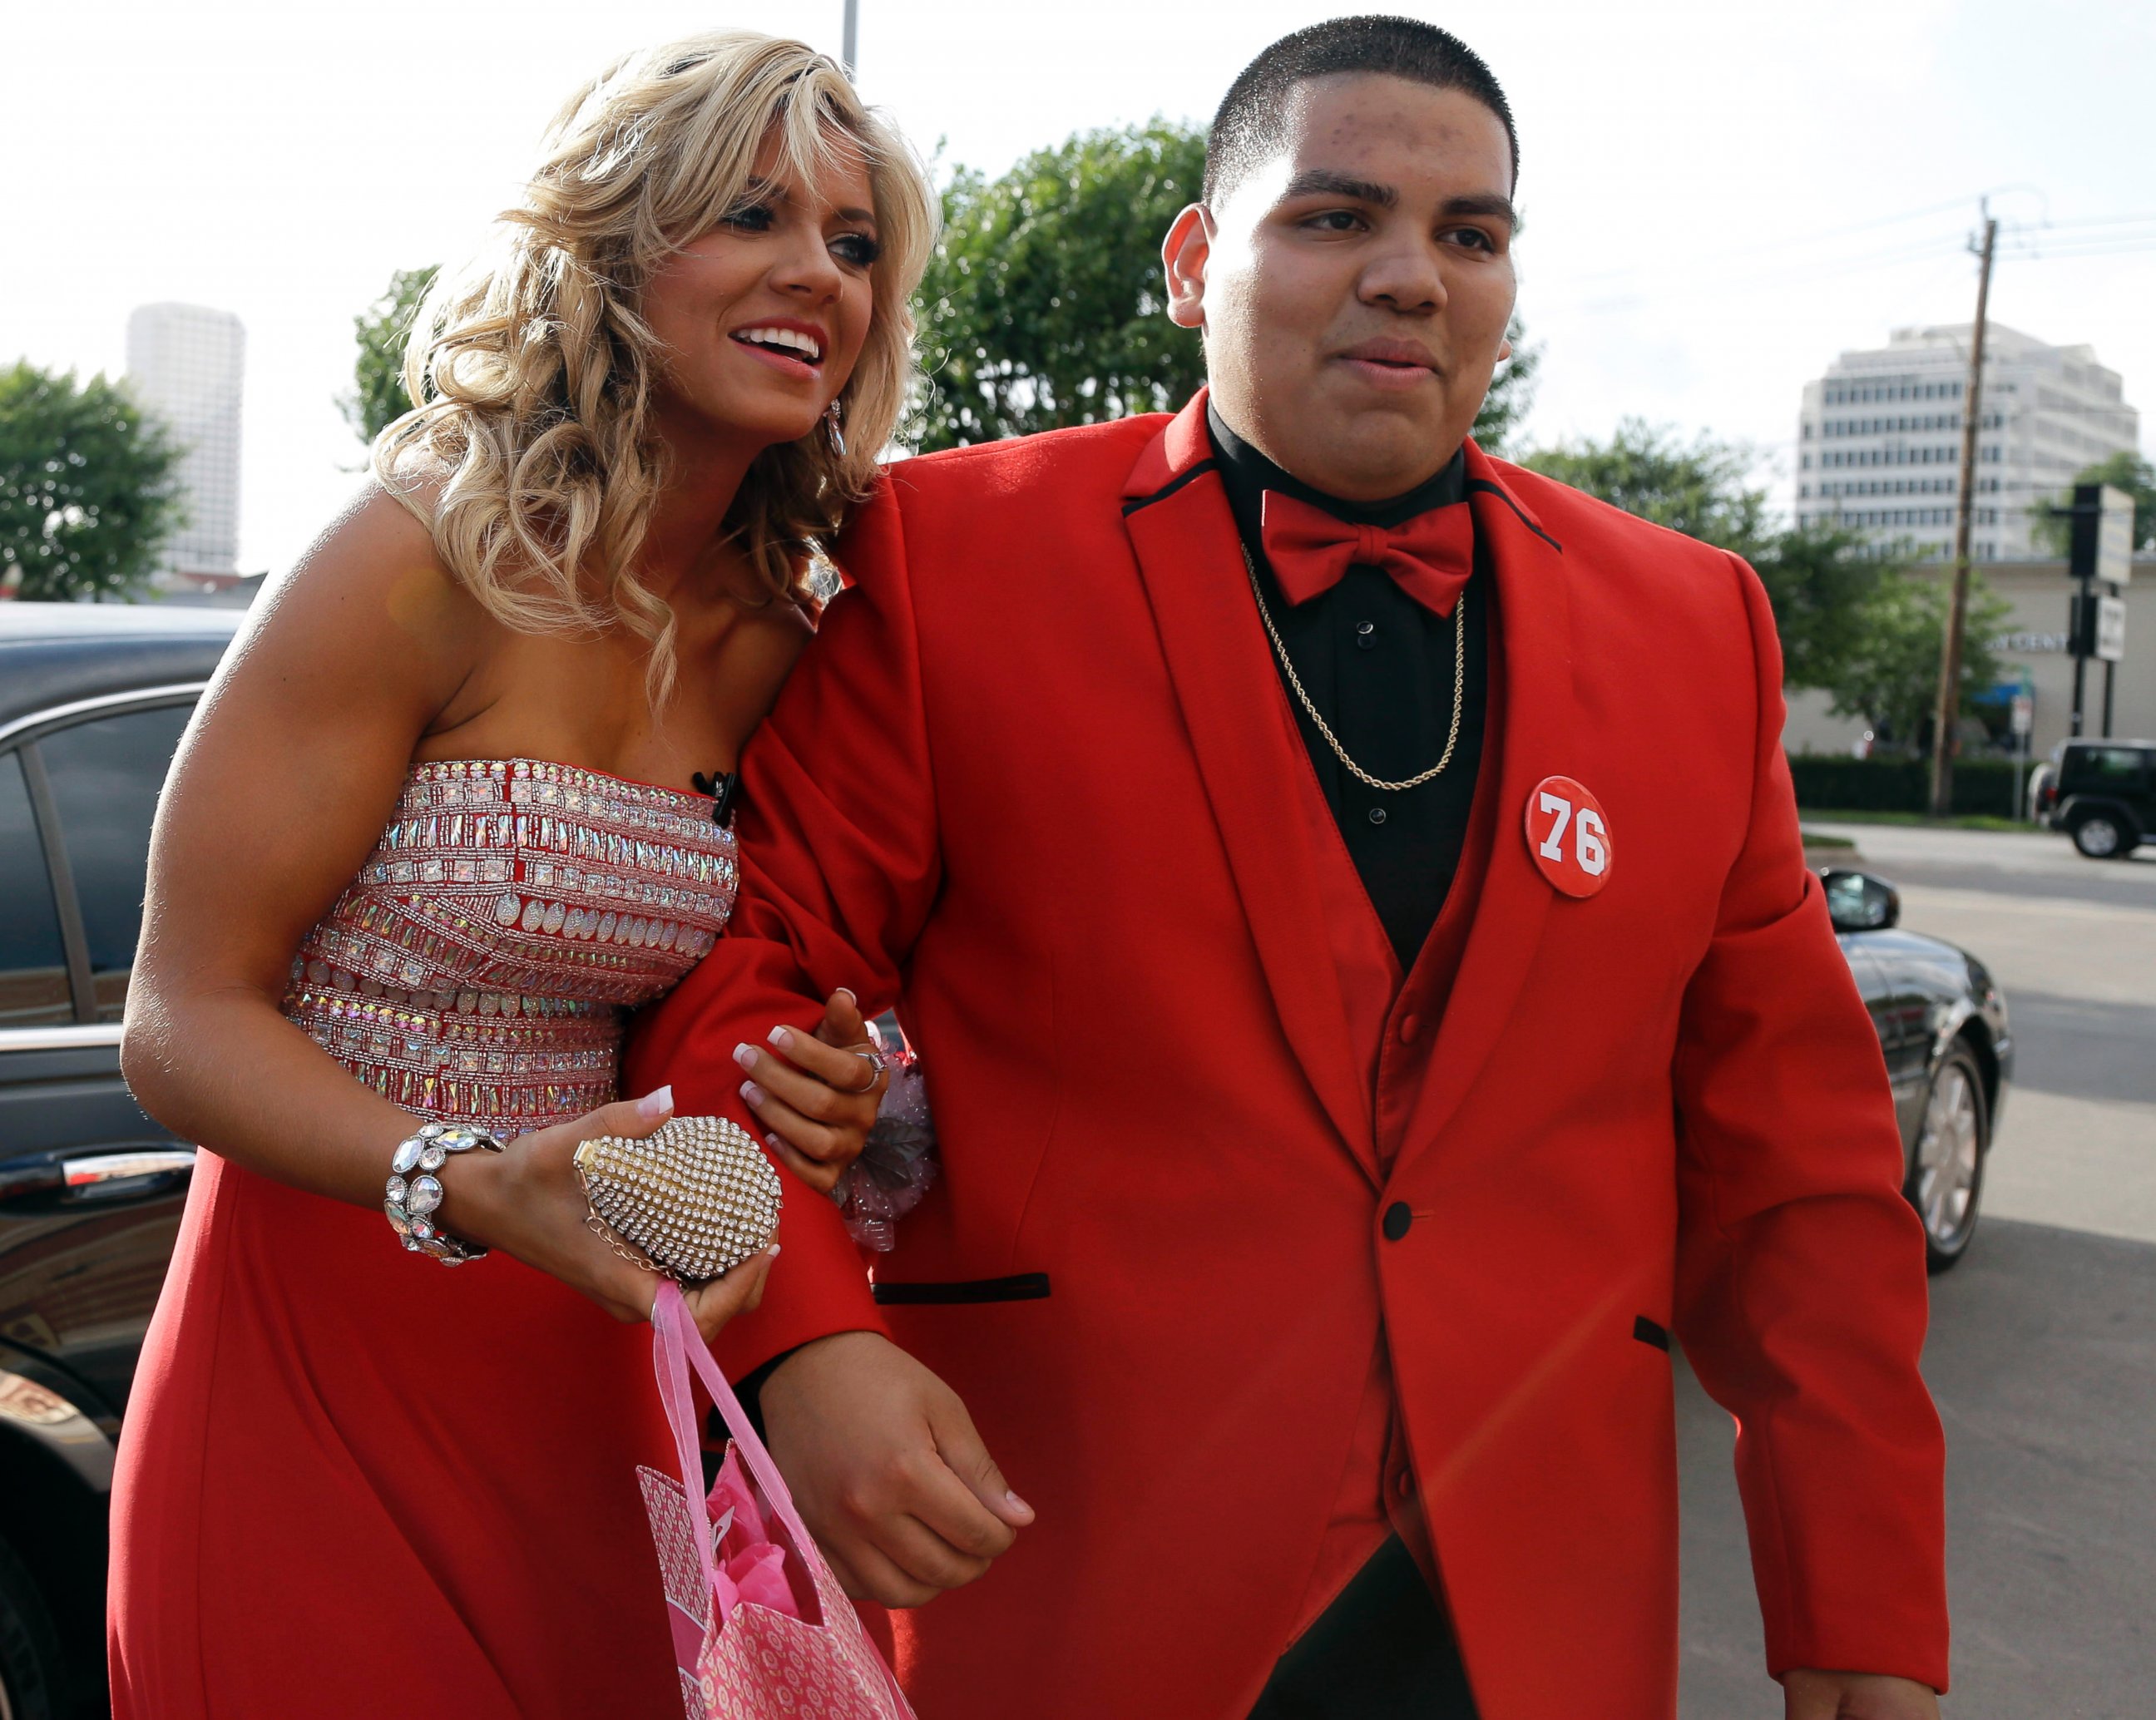 PHOTO: High school student Michael Ramirez, right, and Houston Texans cheerleader Caitlyn pose for pictures outside a restaurant before attending the prom Saturday, May 10, 2014, in Houston.